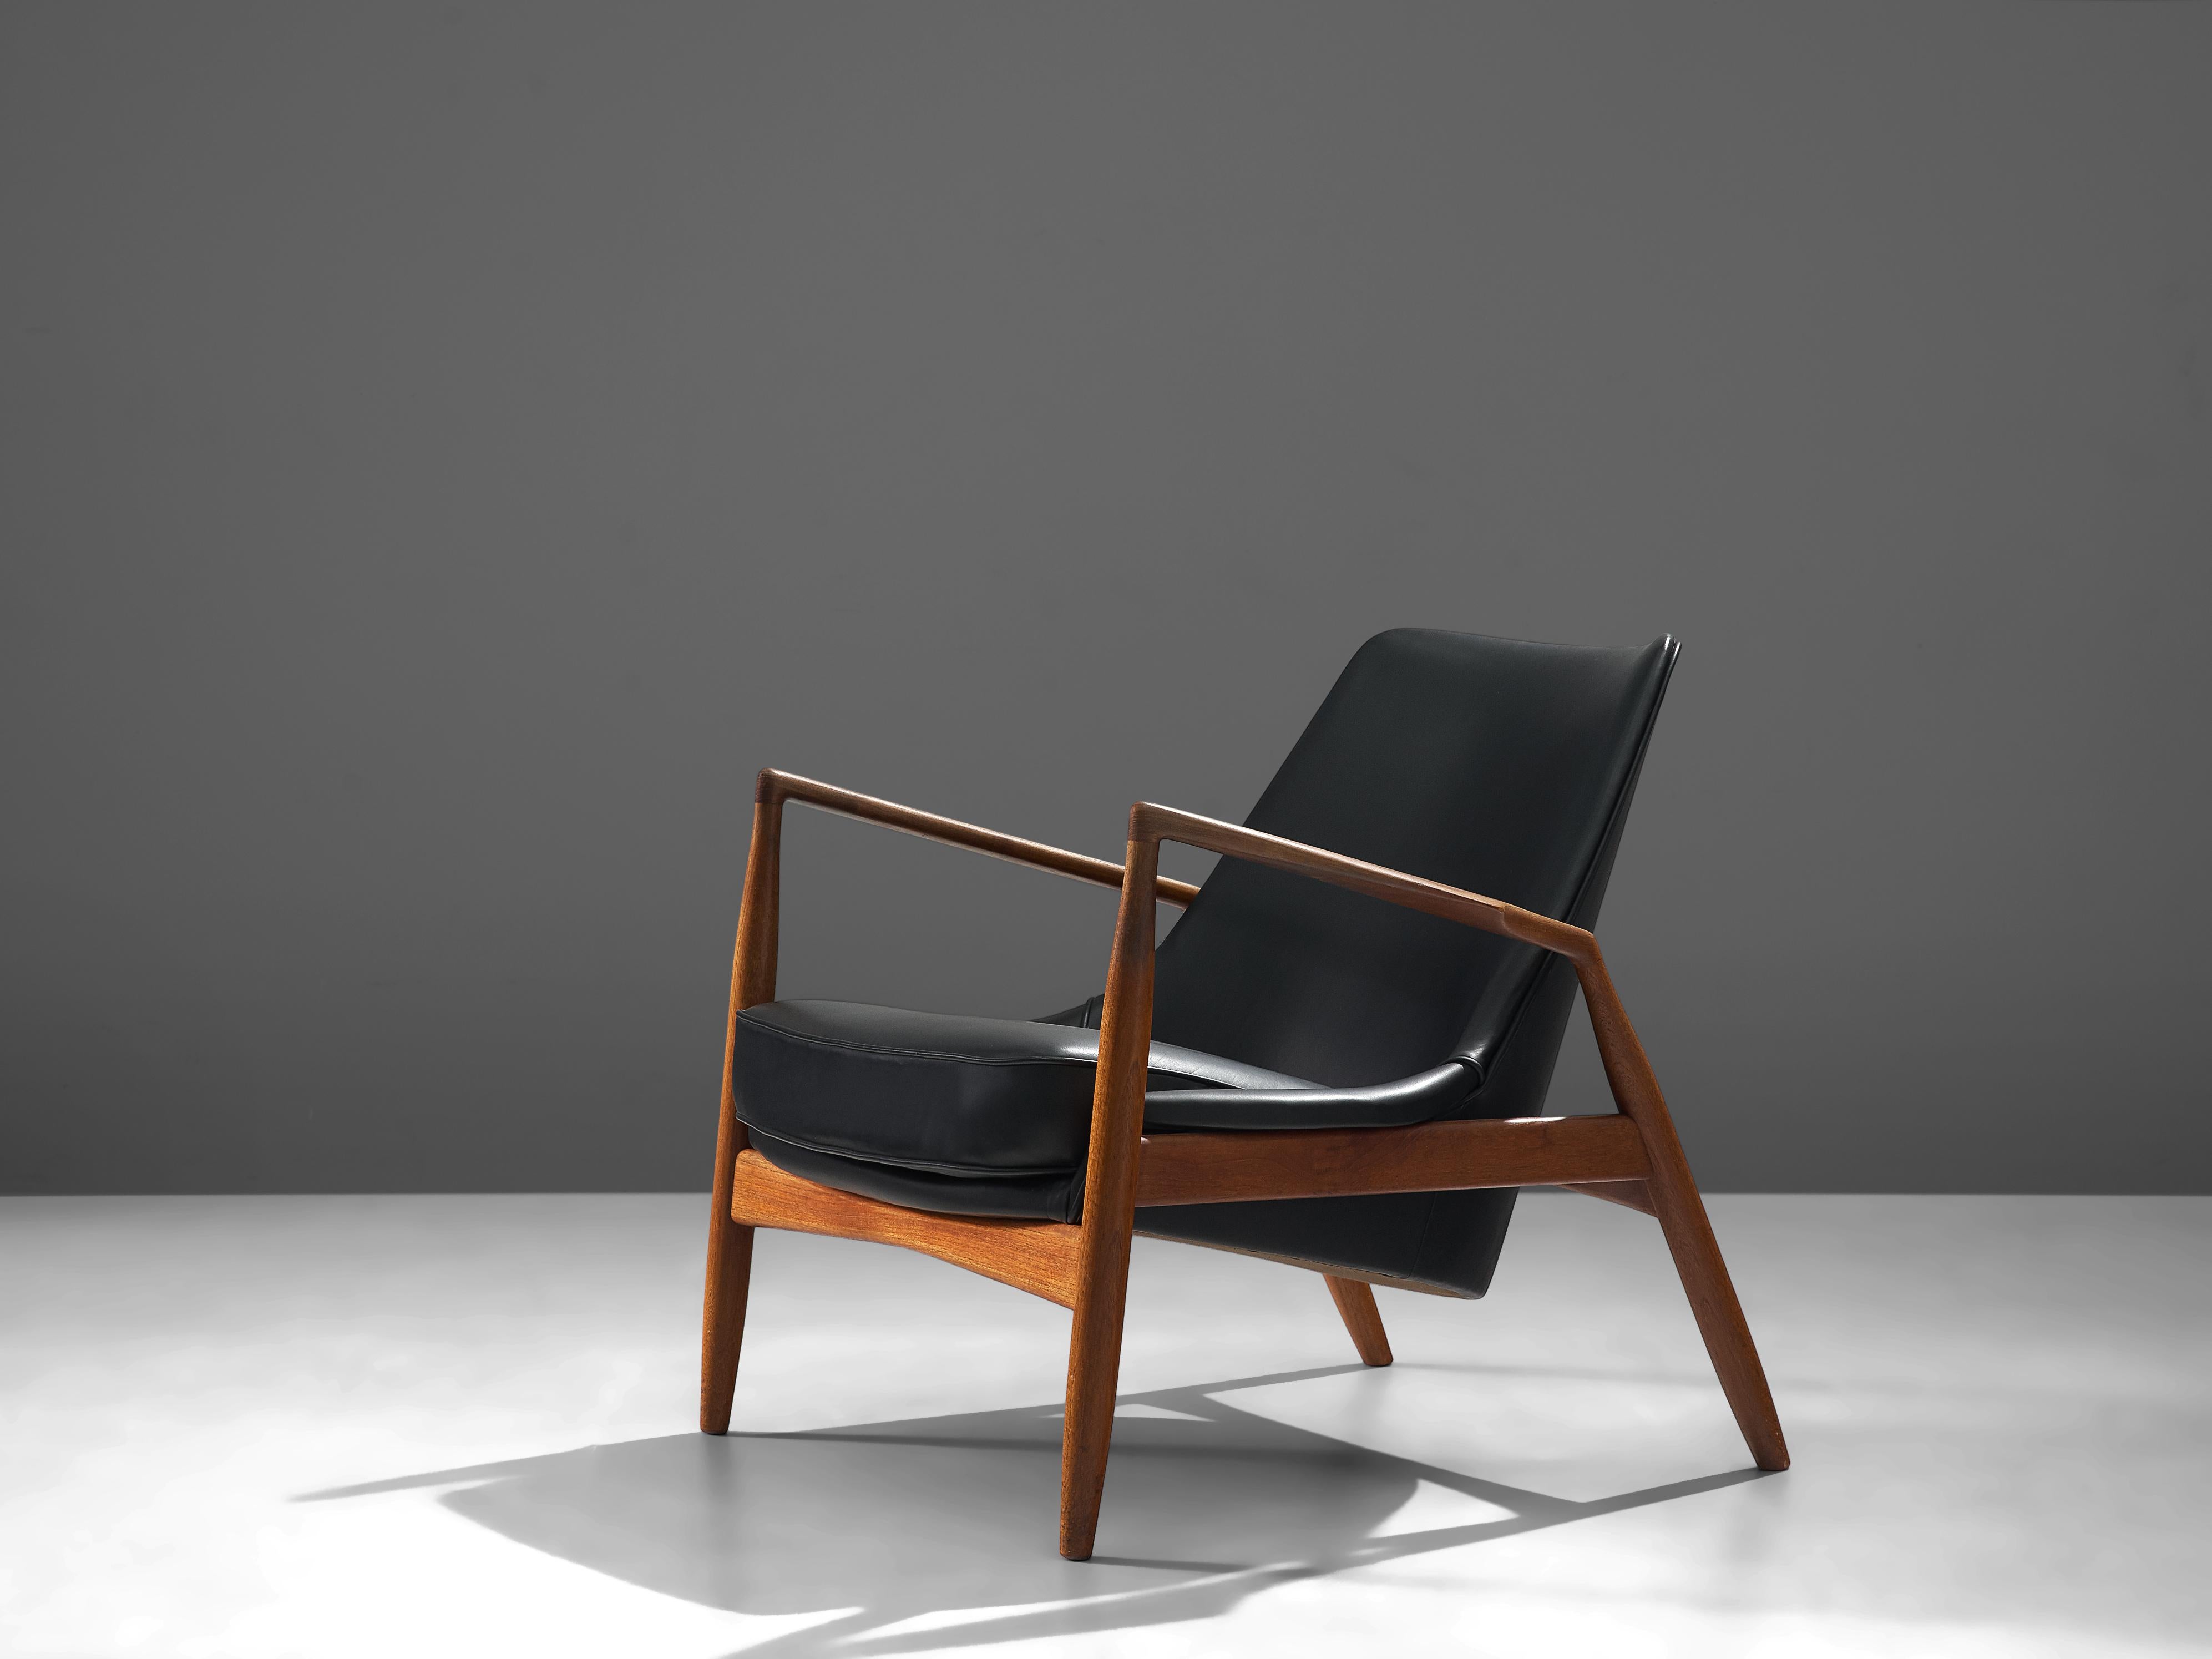 Ib Kofod-Larsen for OPE Möbler, restored 'Sälen' (Seal) lounge chair, model 503-799, teak, black leather, Sweden, 1956 

Iconic 'Sälen' (seal) lounge chair by Danish designer Ib Kofod-Larsen. The well-crafted frame of this chair is mad of a